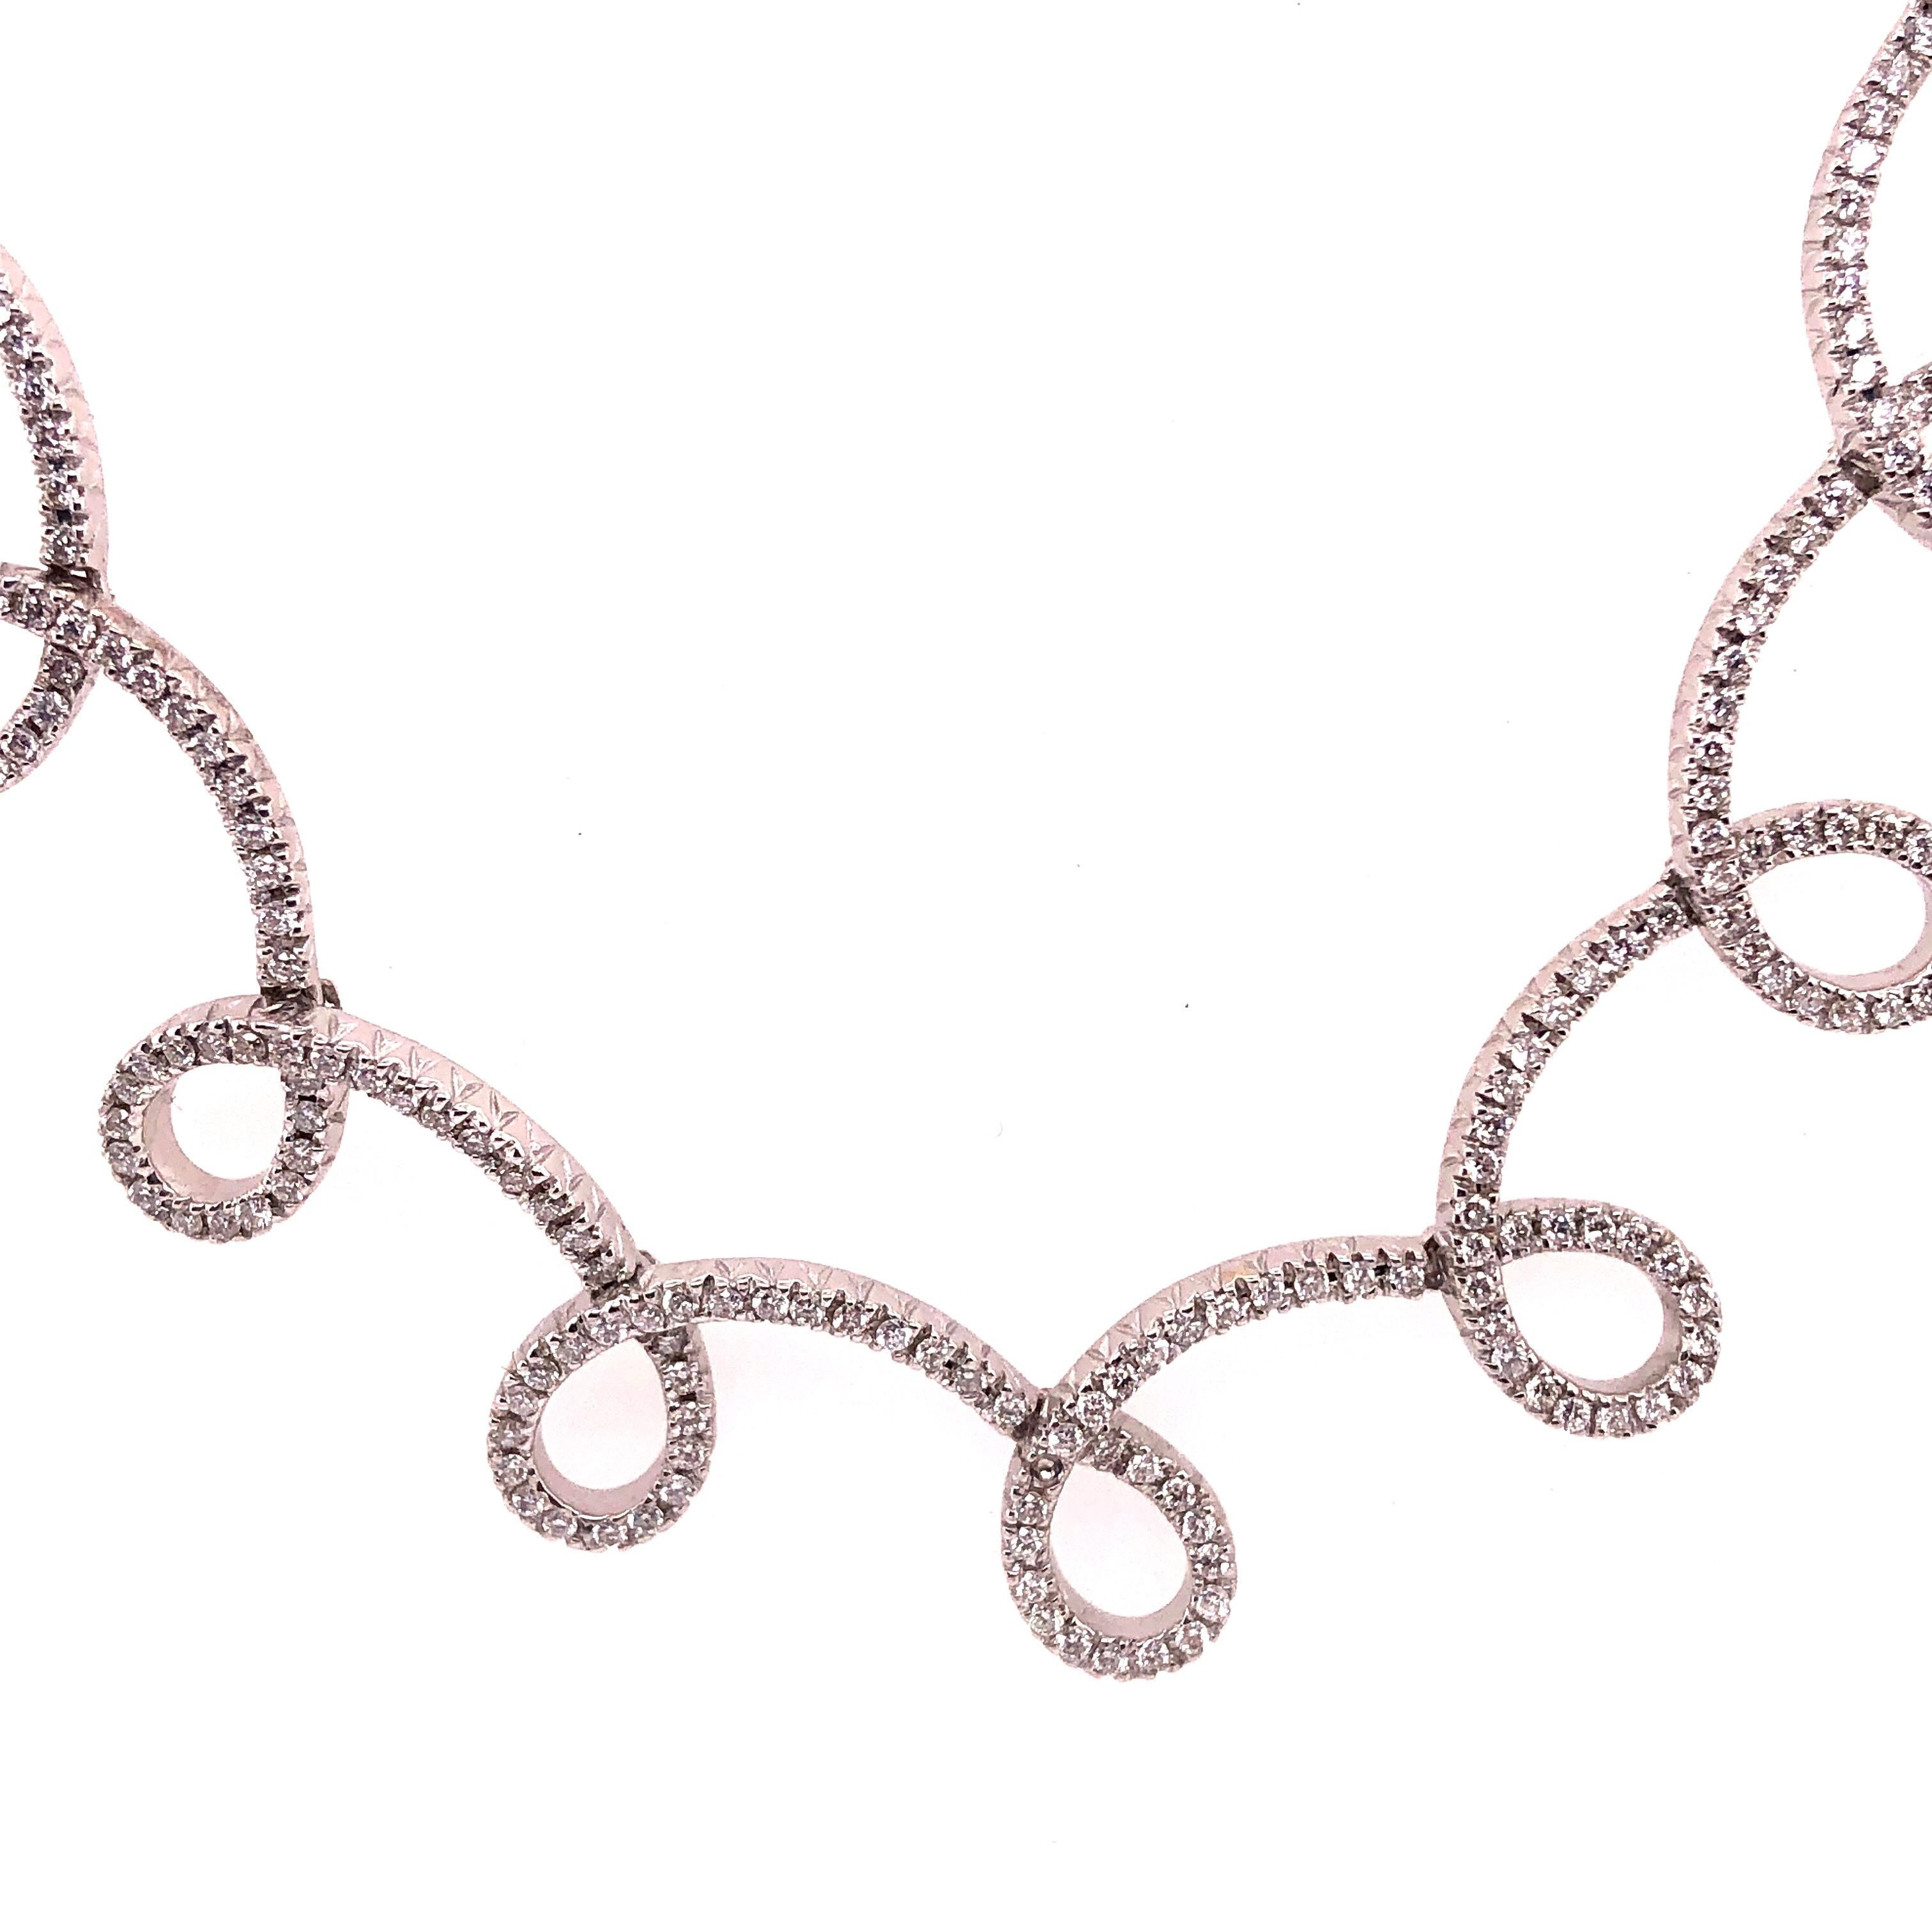 18 Karat White Gold and Diamond Swirl Necklace by H2 at Hammerman In Good Condition For Sale In Stamford, CT